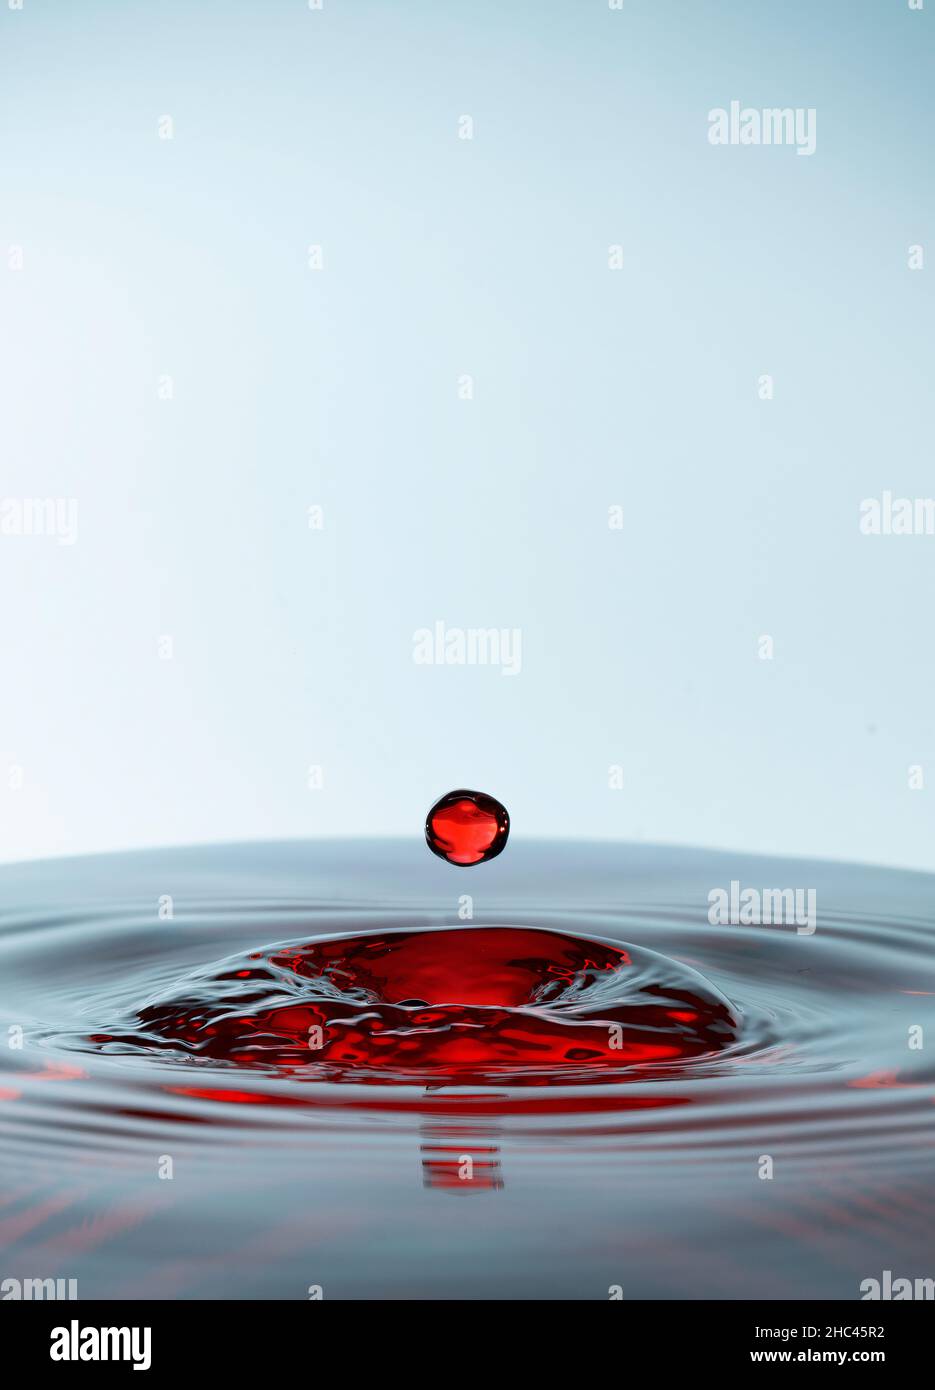 Water drop splash red colored, isolated on white background. Stock Photo